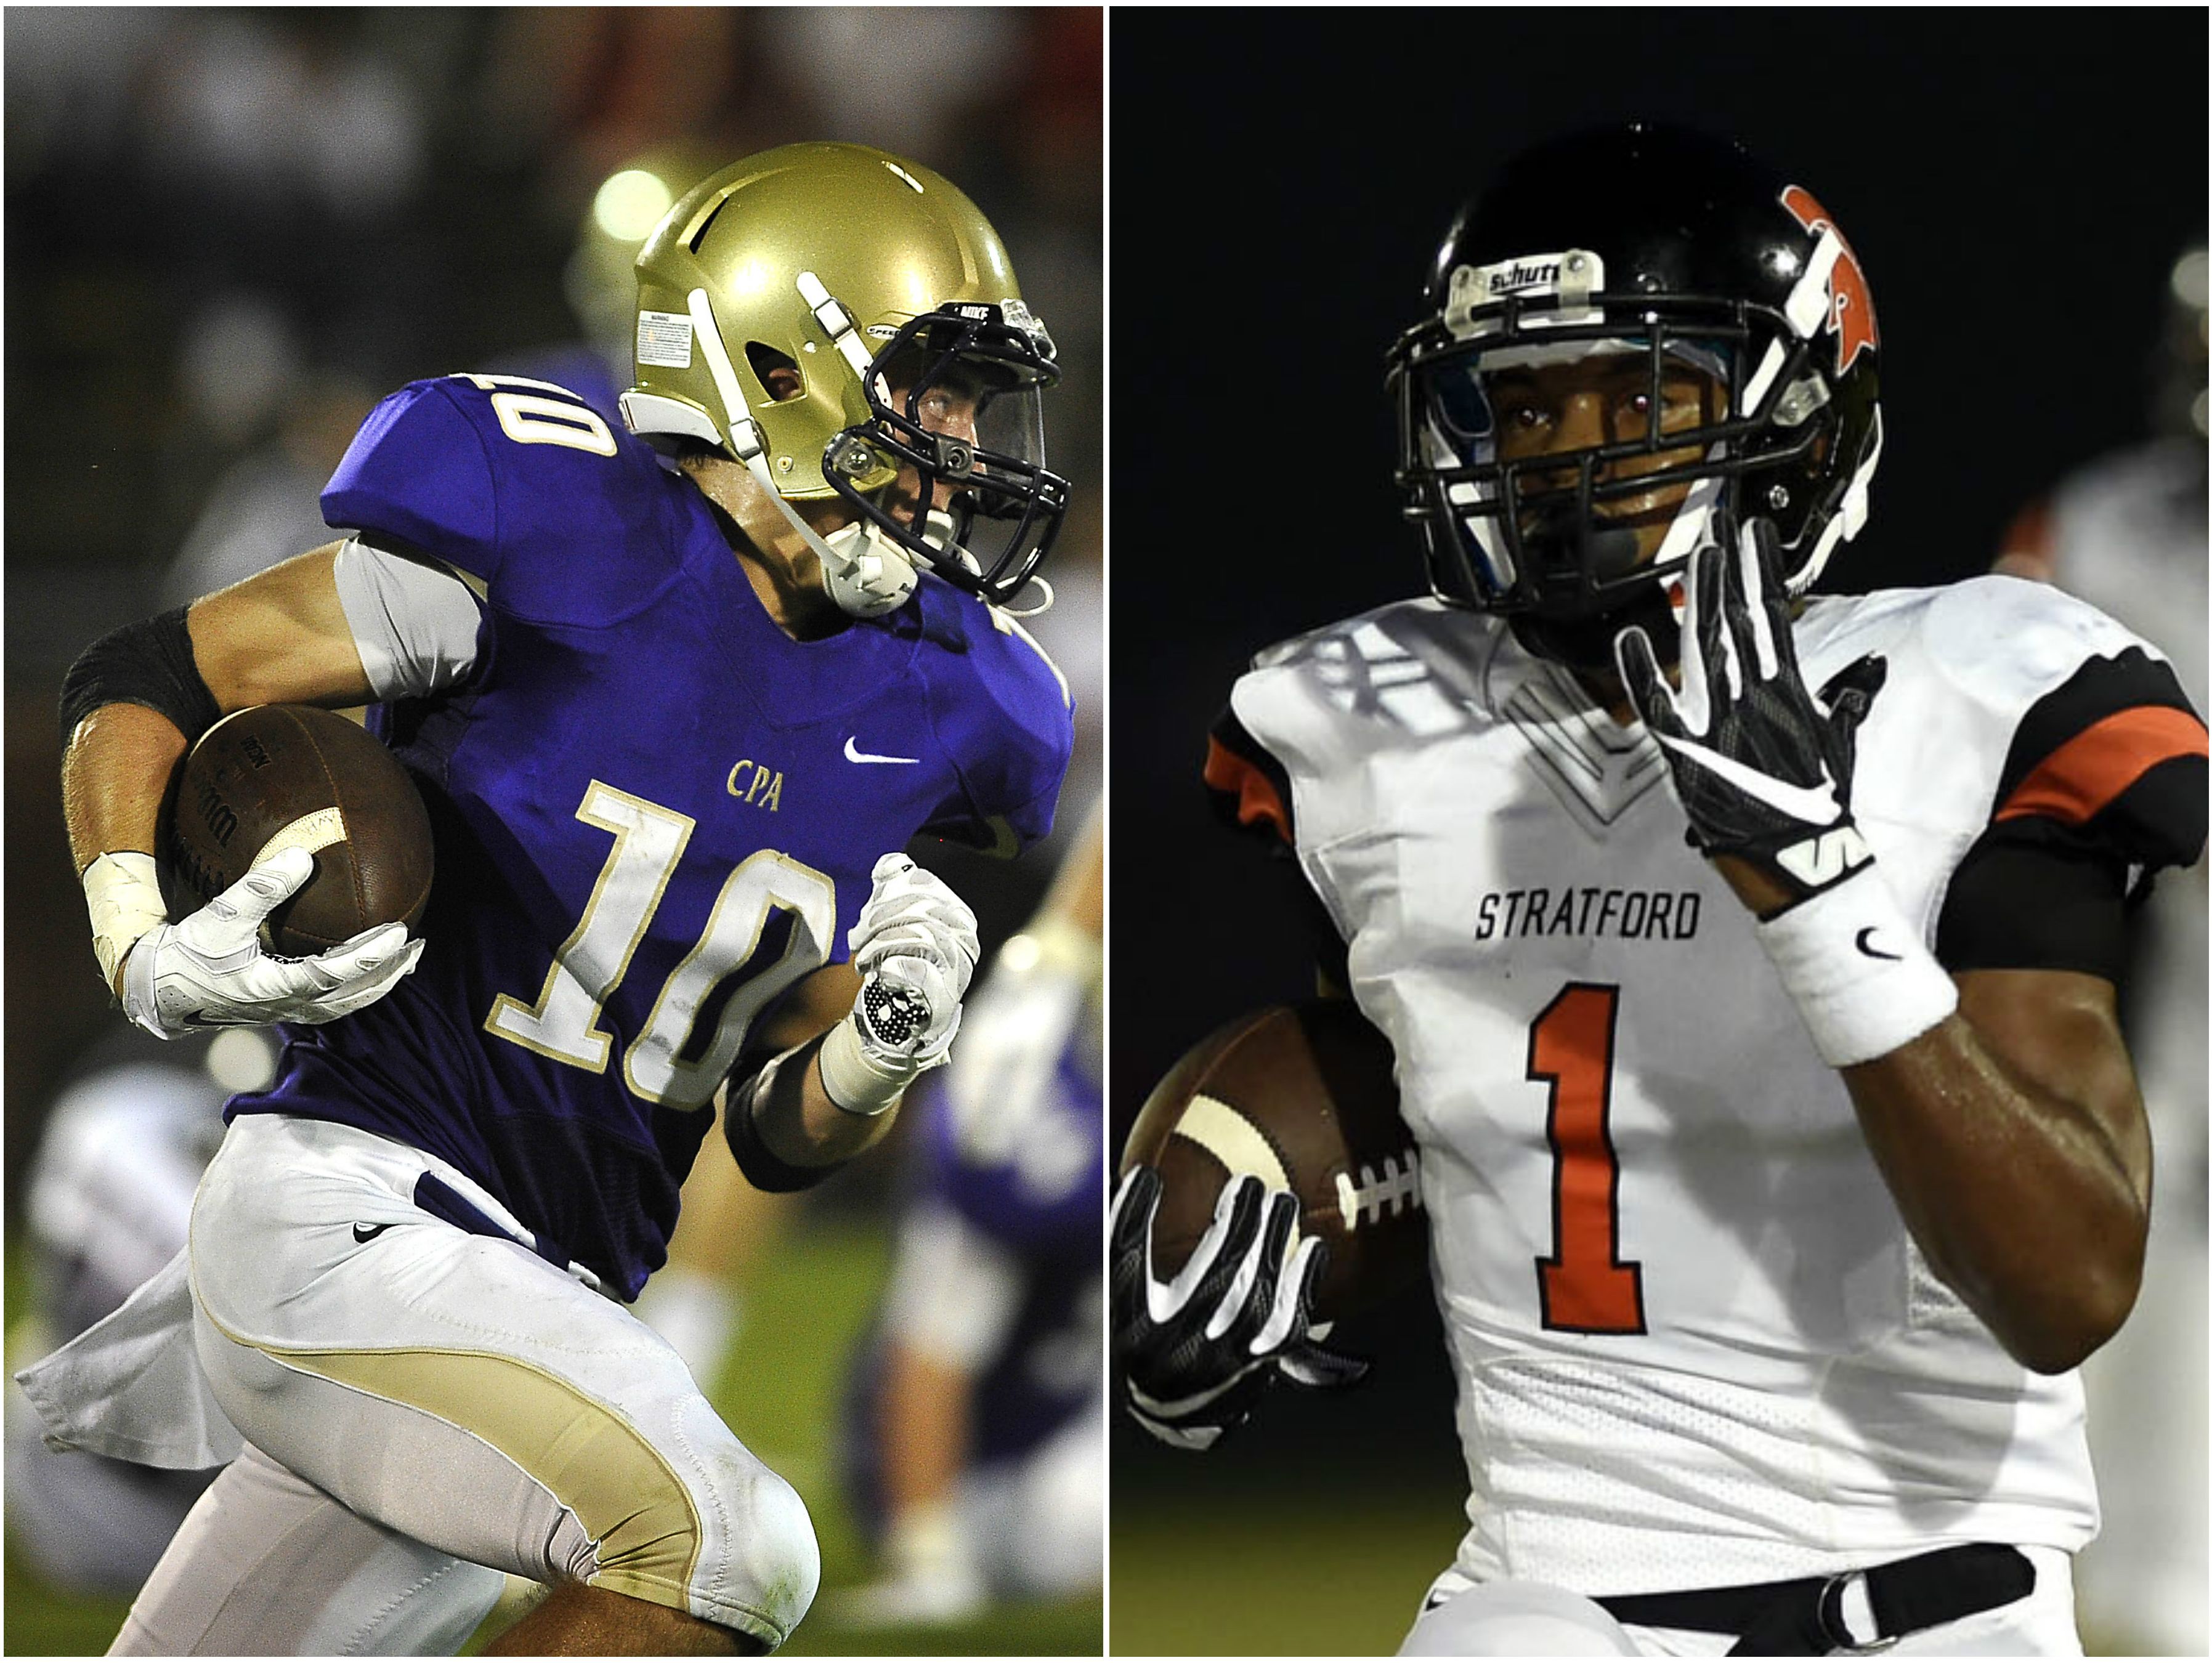 CPA receiver Andrew Howard (left) and Stratford running back T.J. Carter (right)